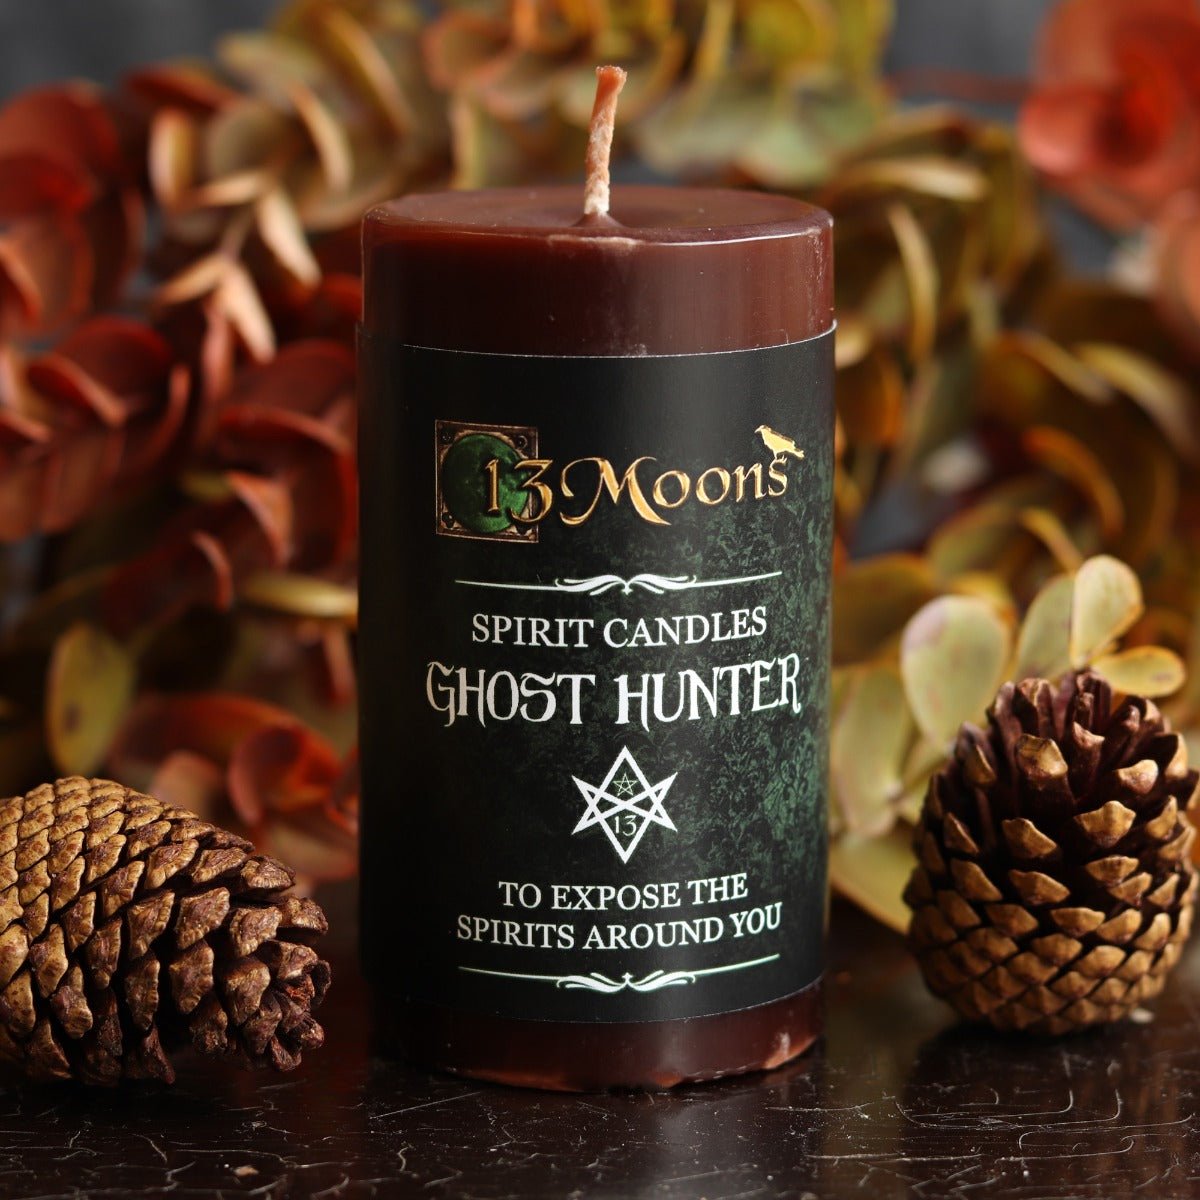 Ghost Hunter Candle - 13 Moons